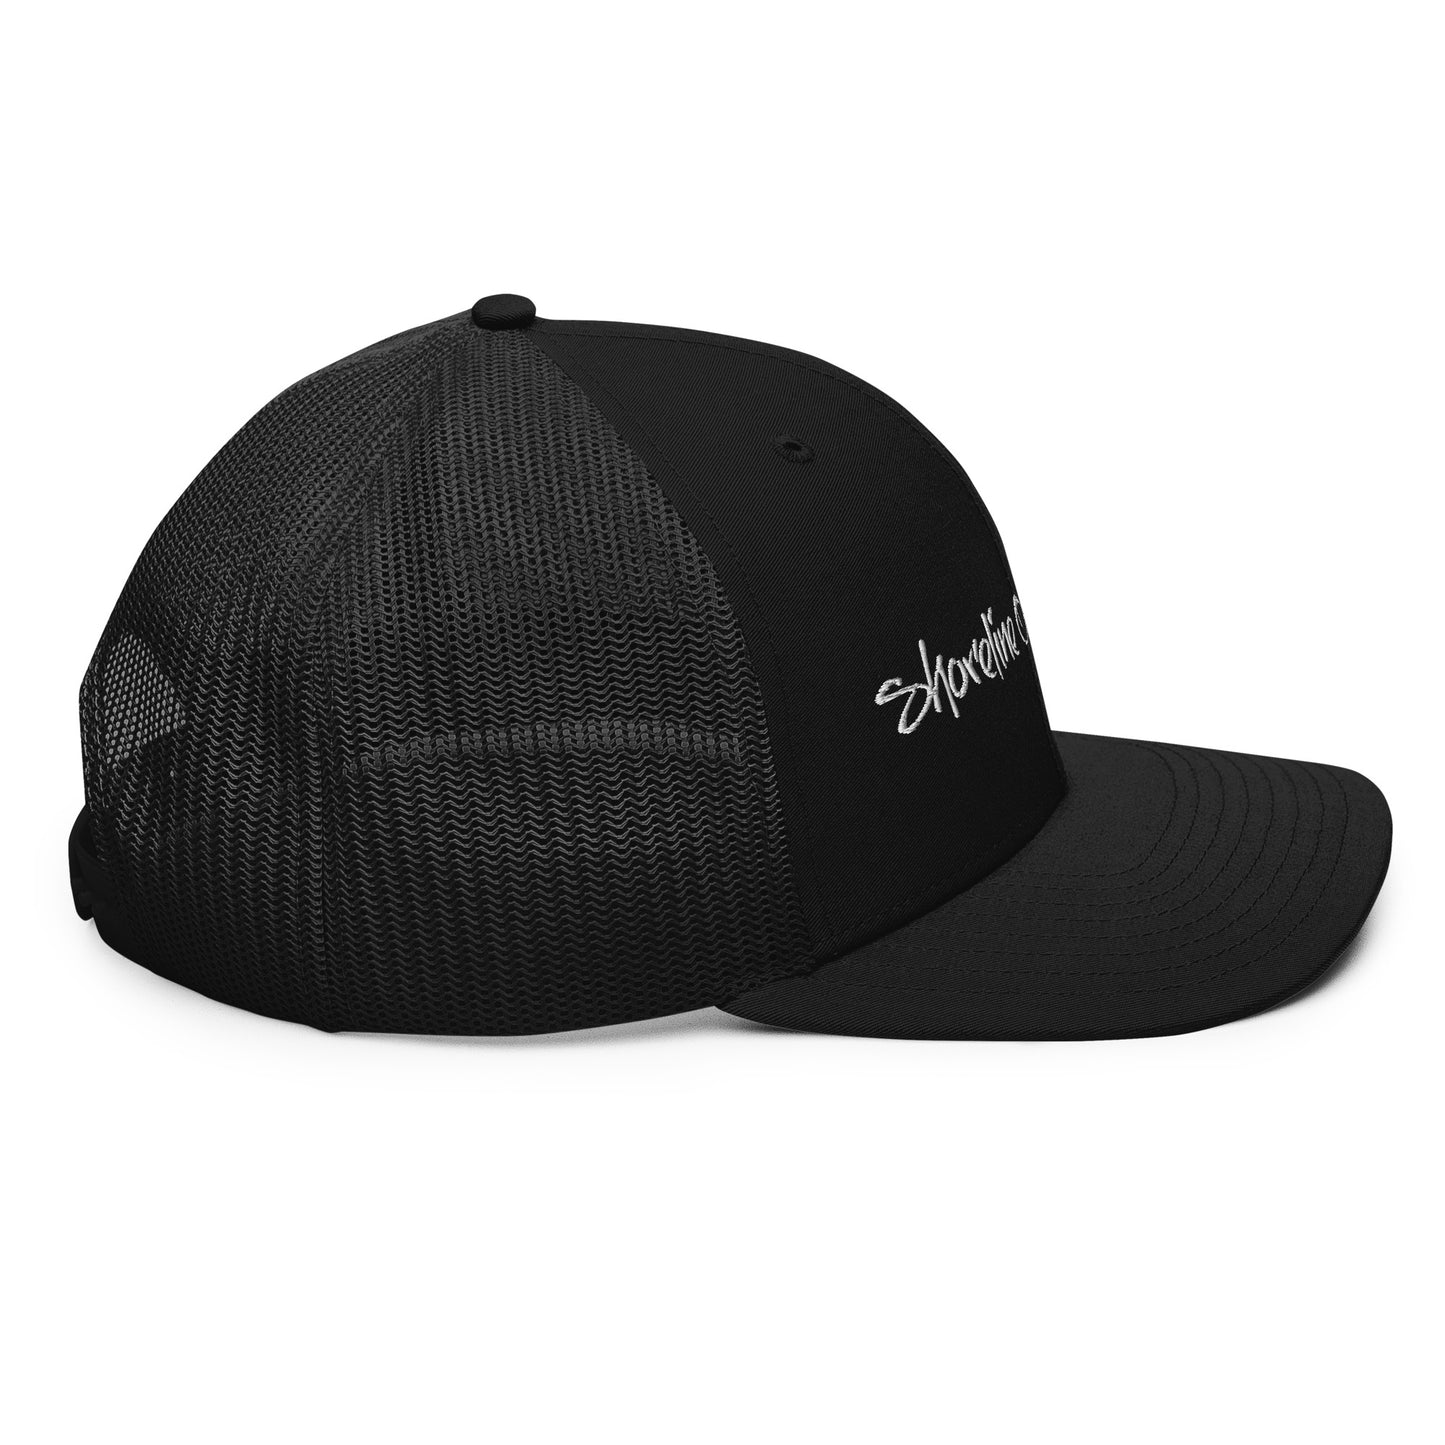 a black hat with a white logo on it